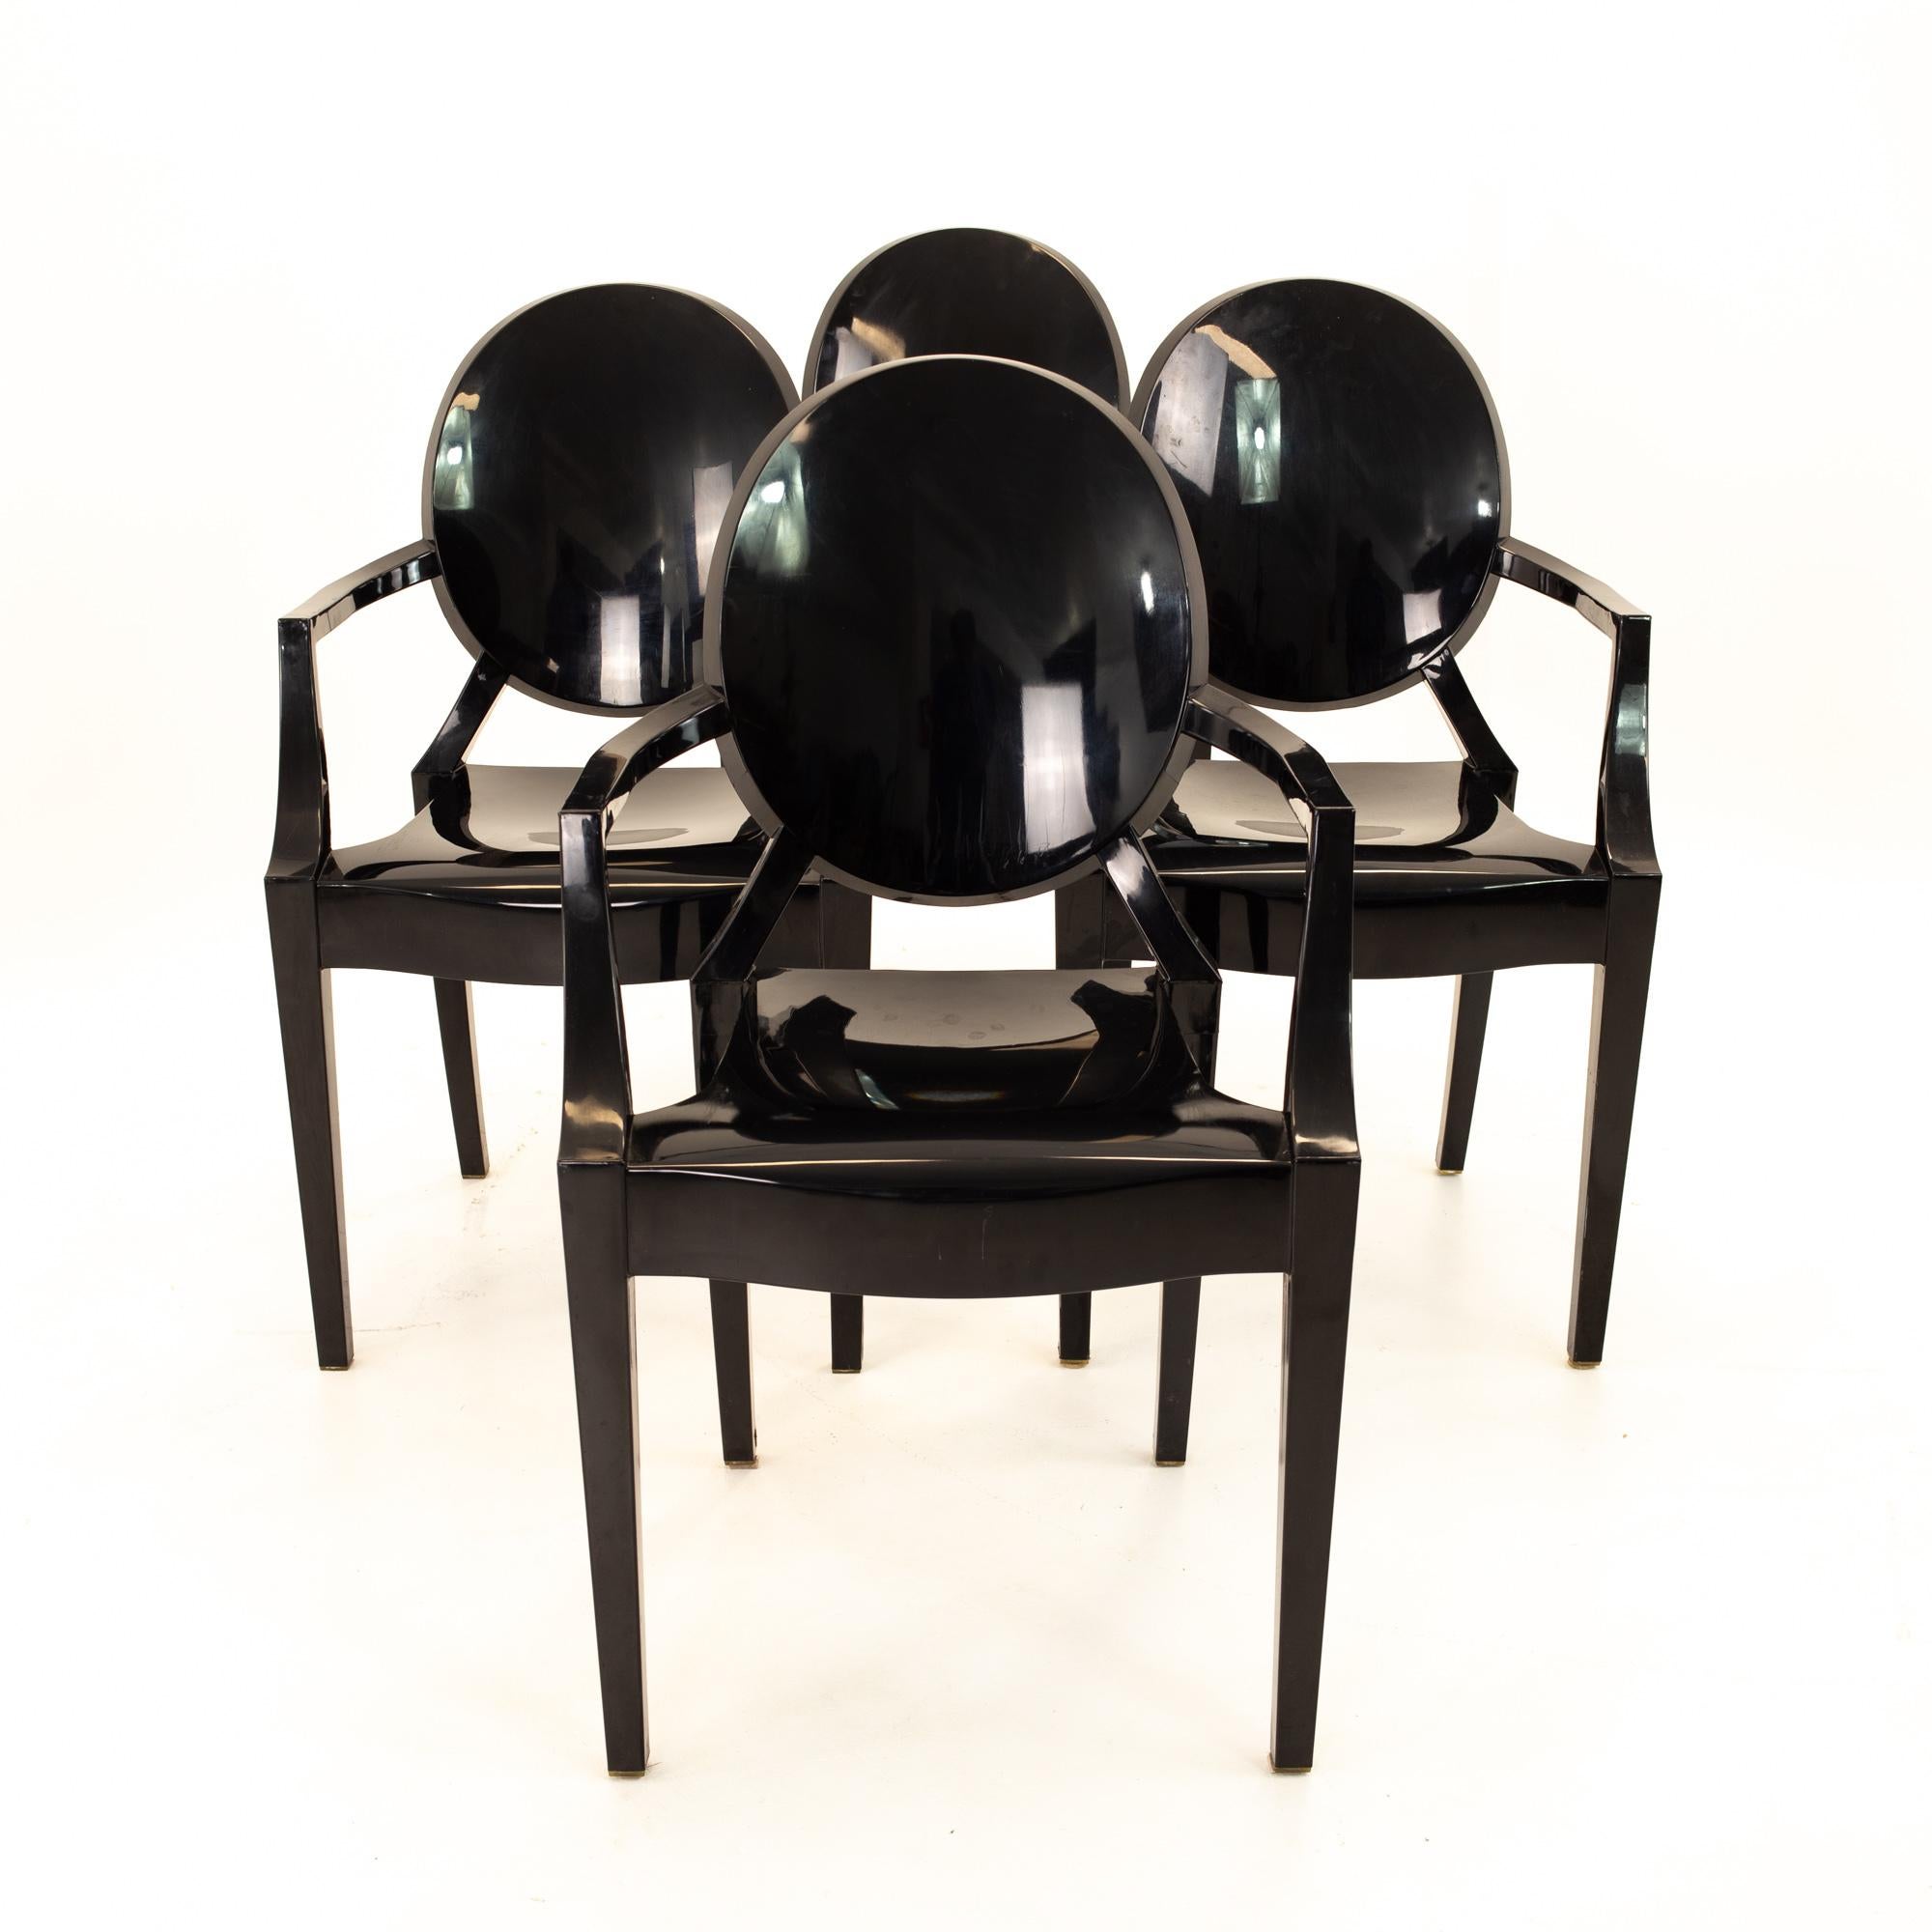 Kartell Mid Century black acrylic ghost dining chairs, set of 4
Each chair measures: 21.25 wide x 22 deep x 36.5 high with a seat height of 19 inches

This set is available in what we call restored vintage condition. Upon purchase it is thoroughly